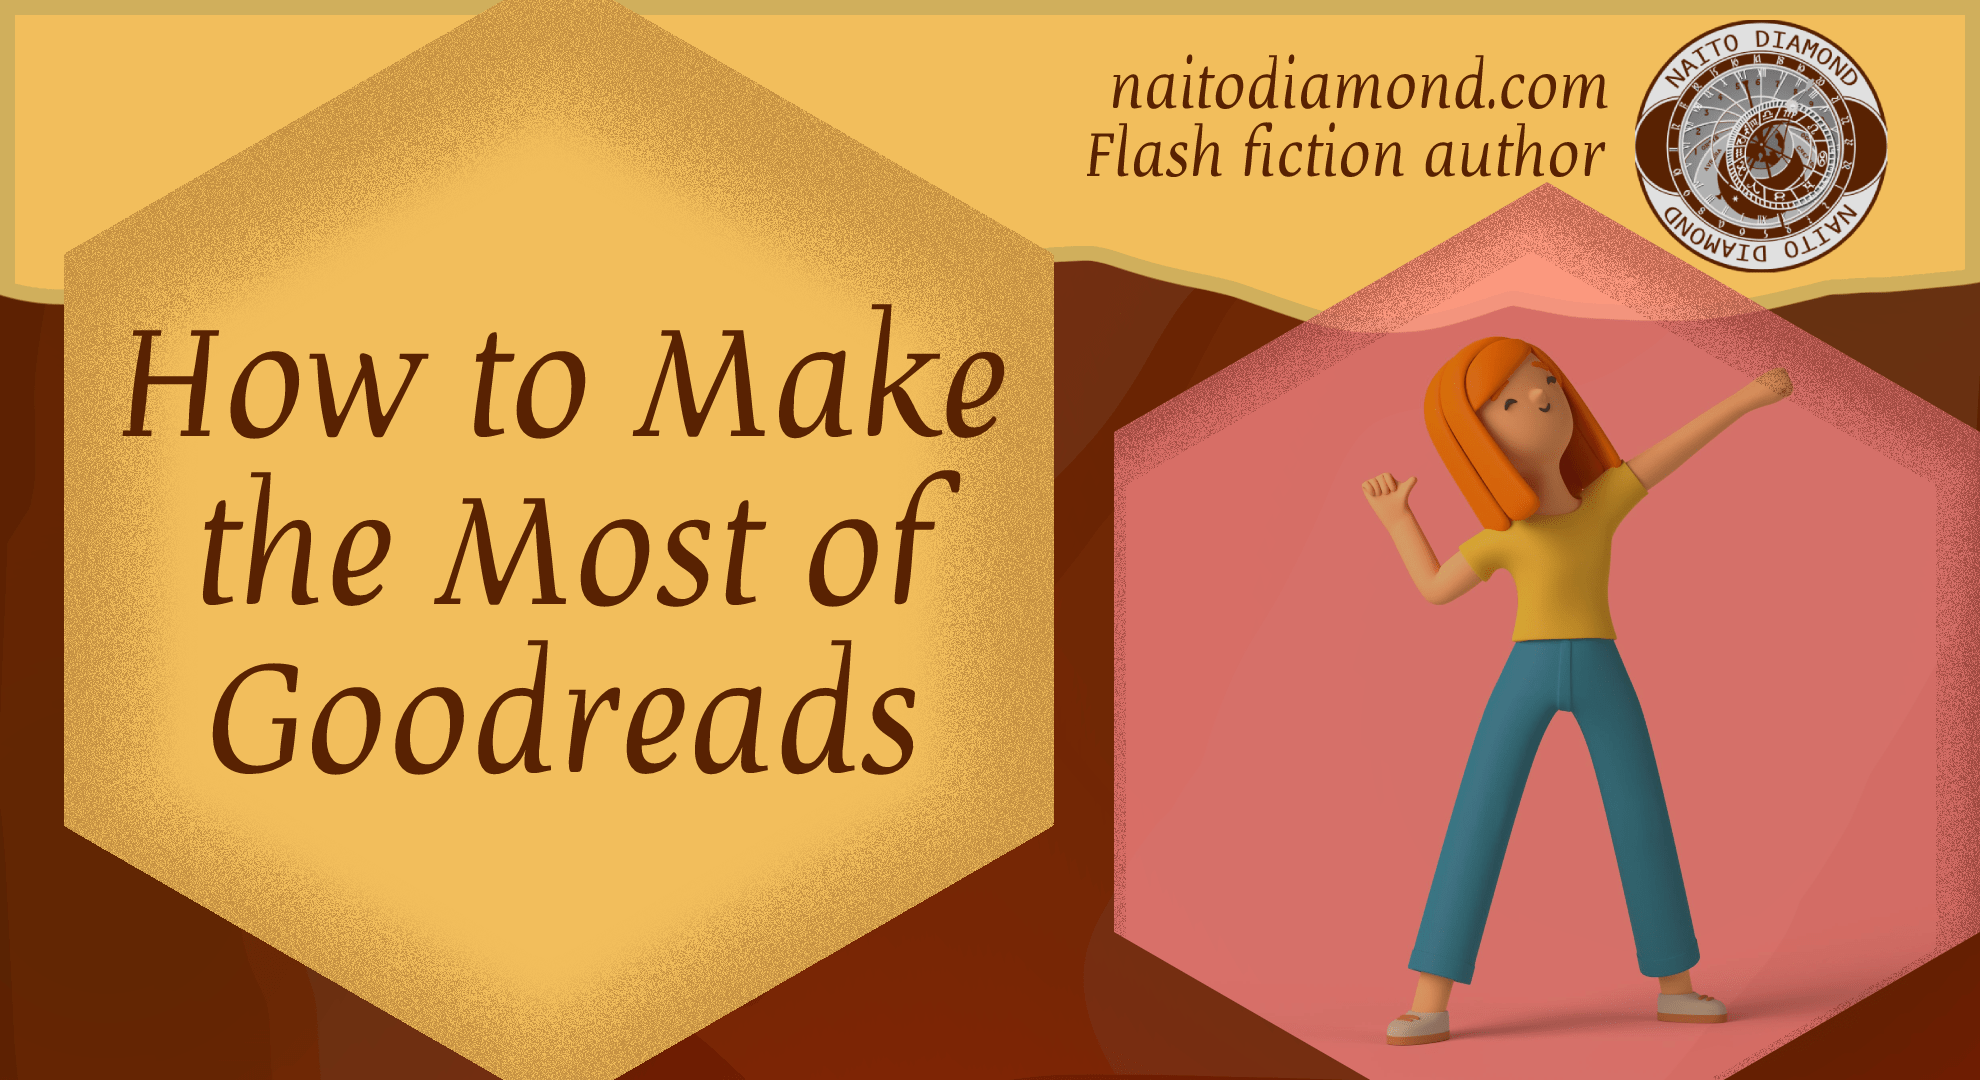 How to Make the Most of Goodreads